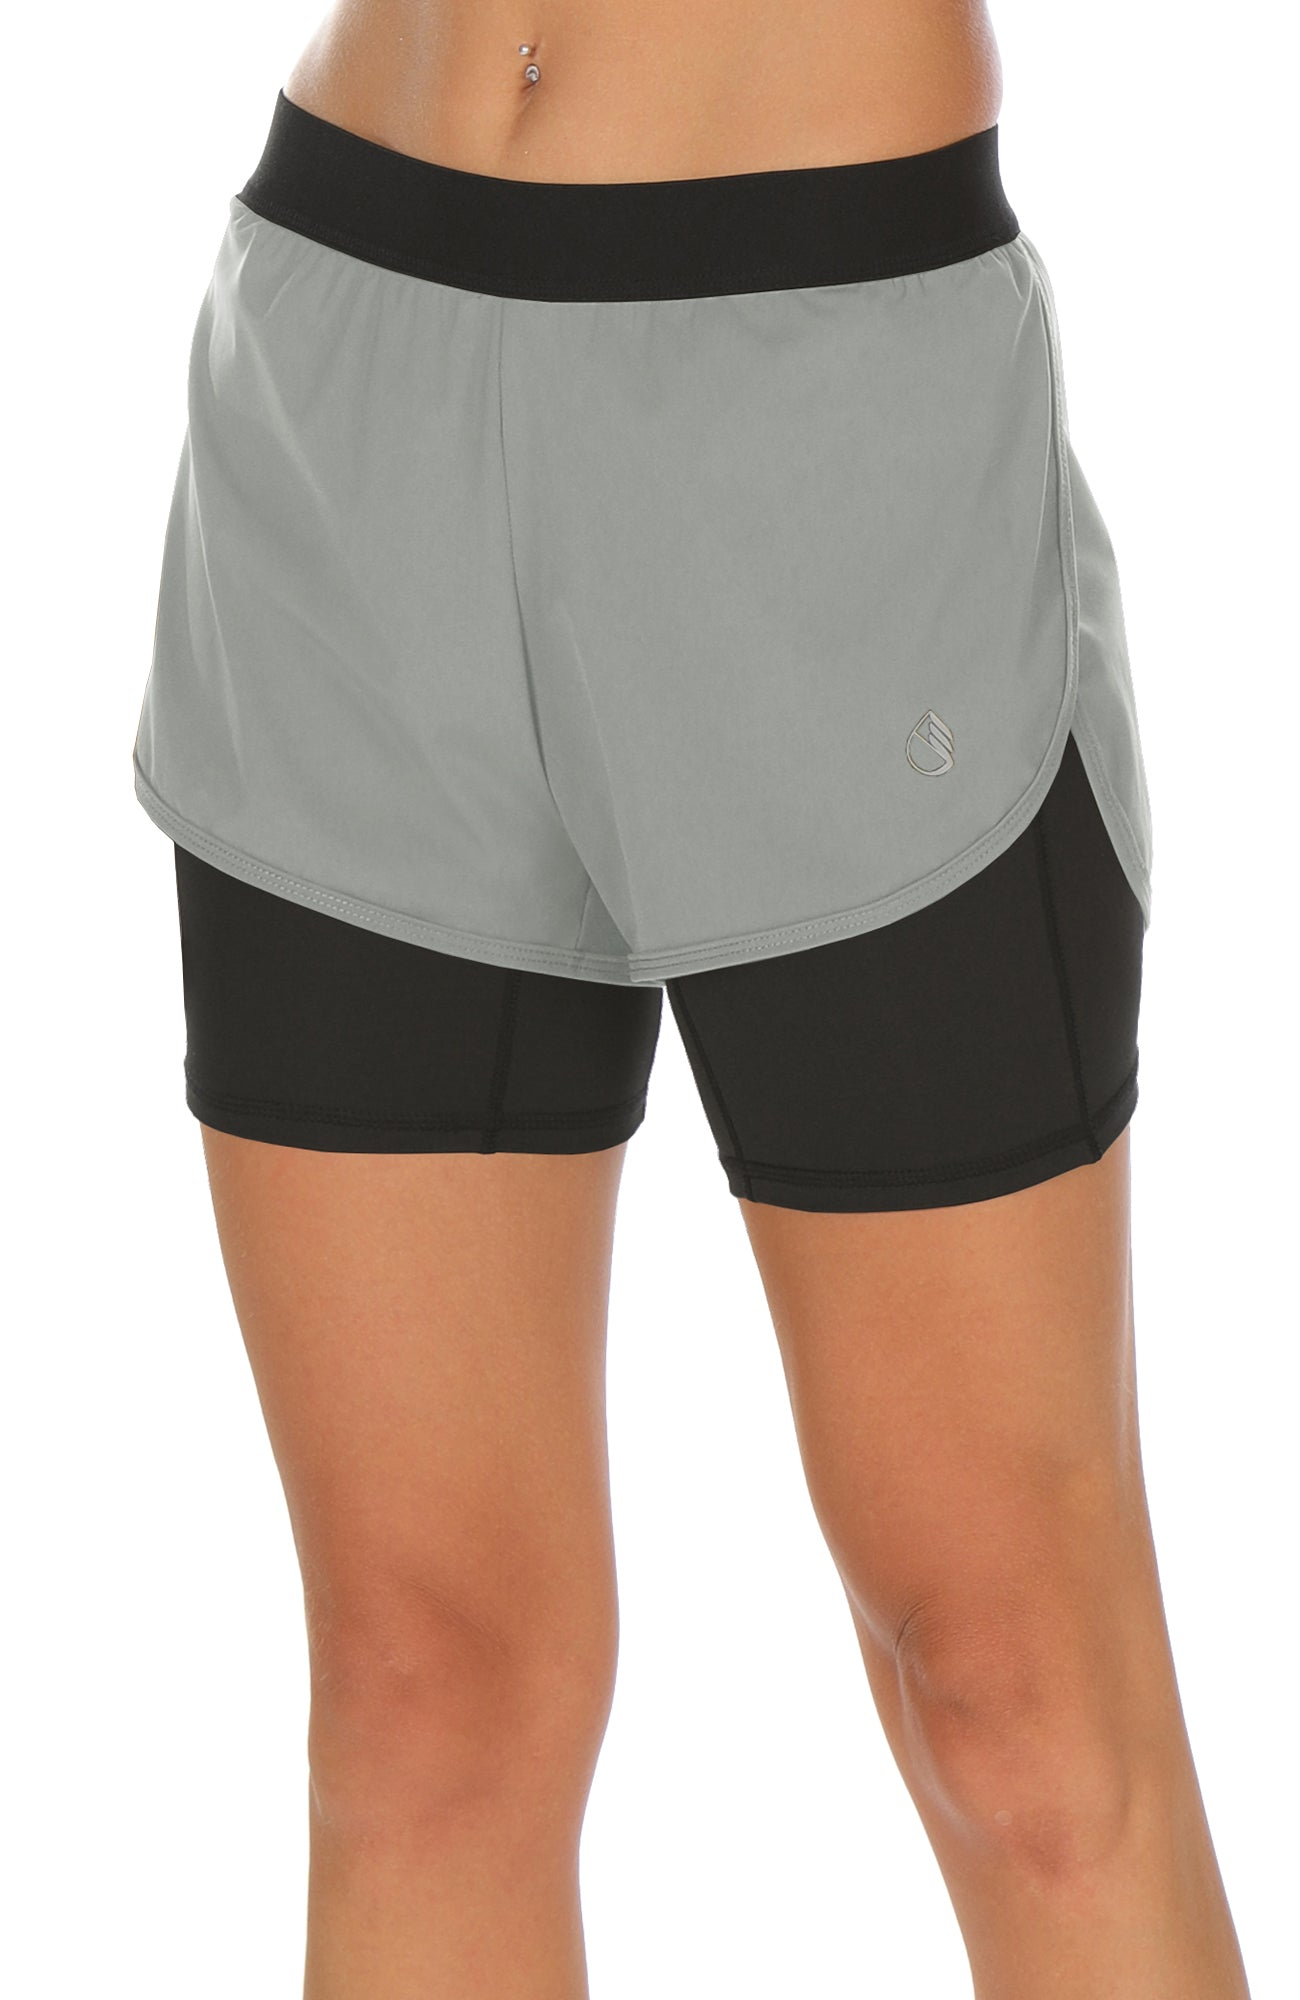 Women's Yoga Casual Shorts Fitness Exercise Athletic Jogging 2-in-1 Short  Pants